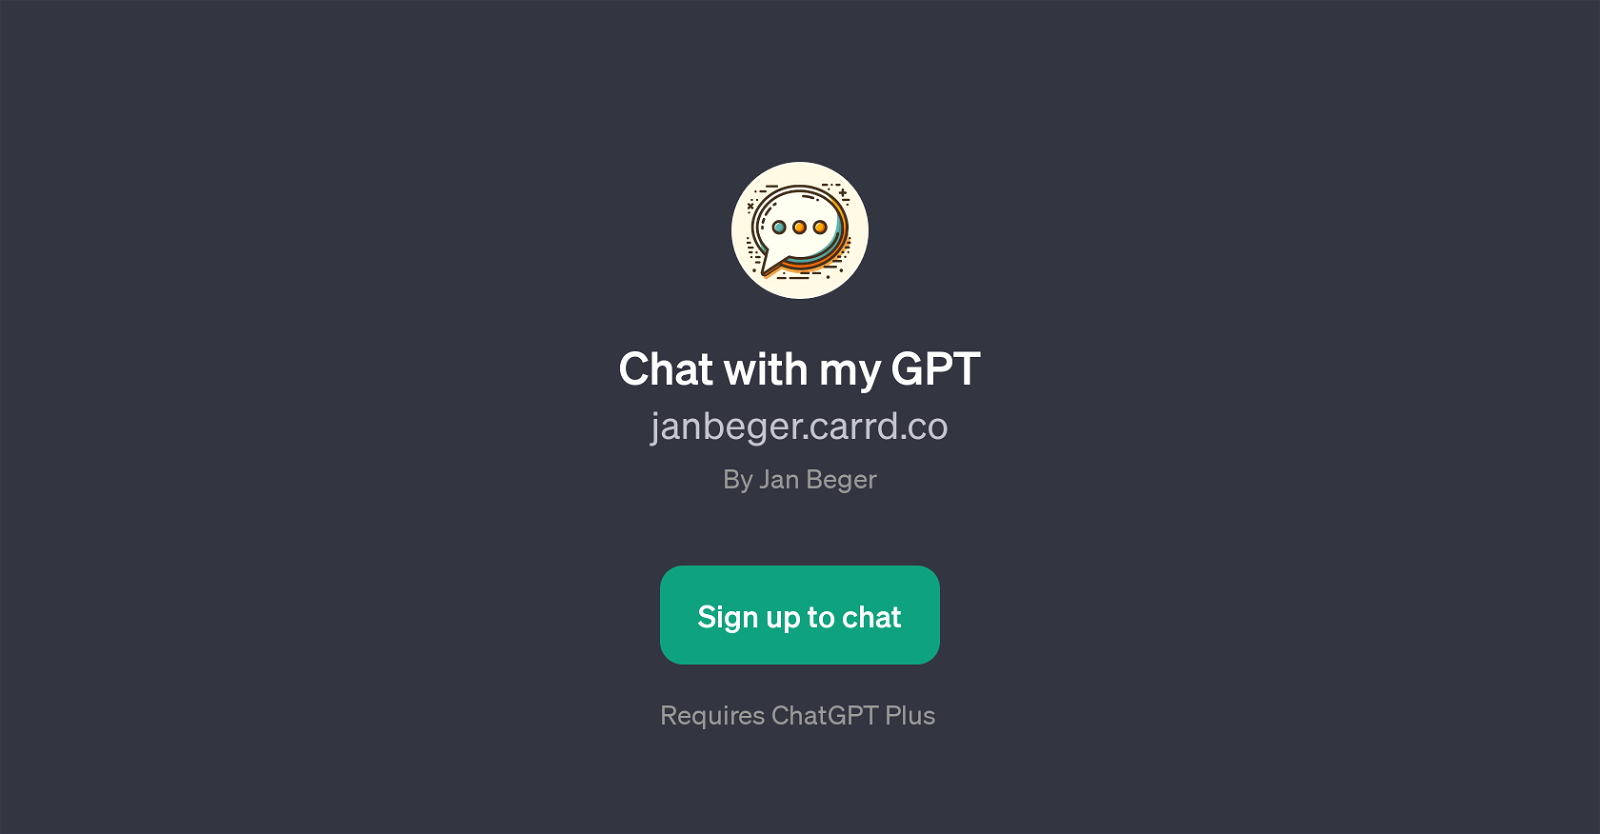 Chat with my GPT website